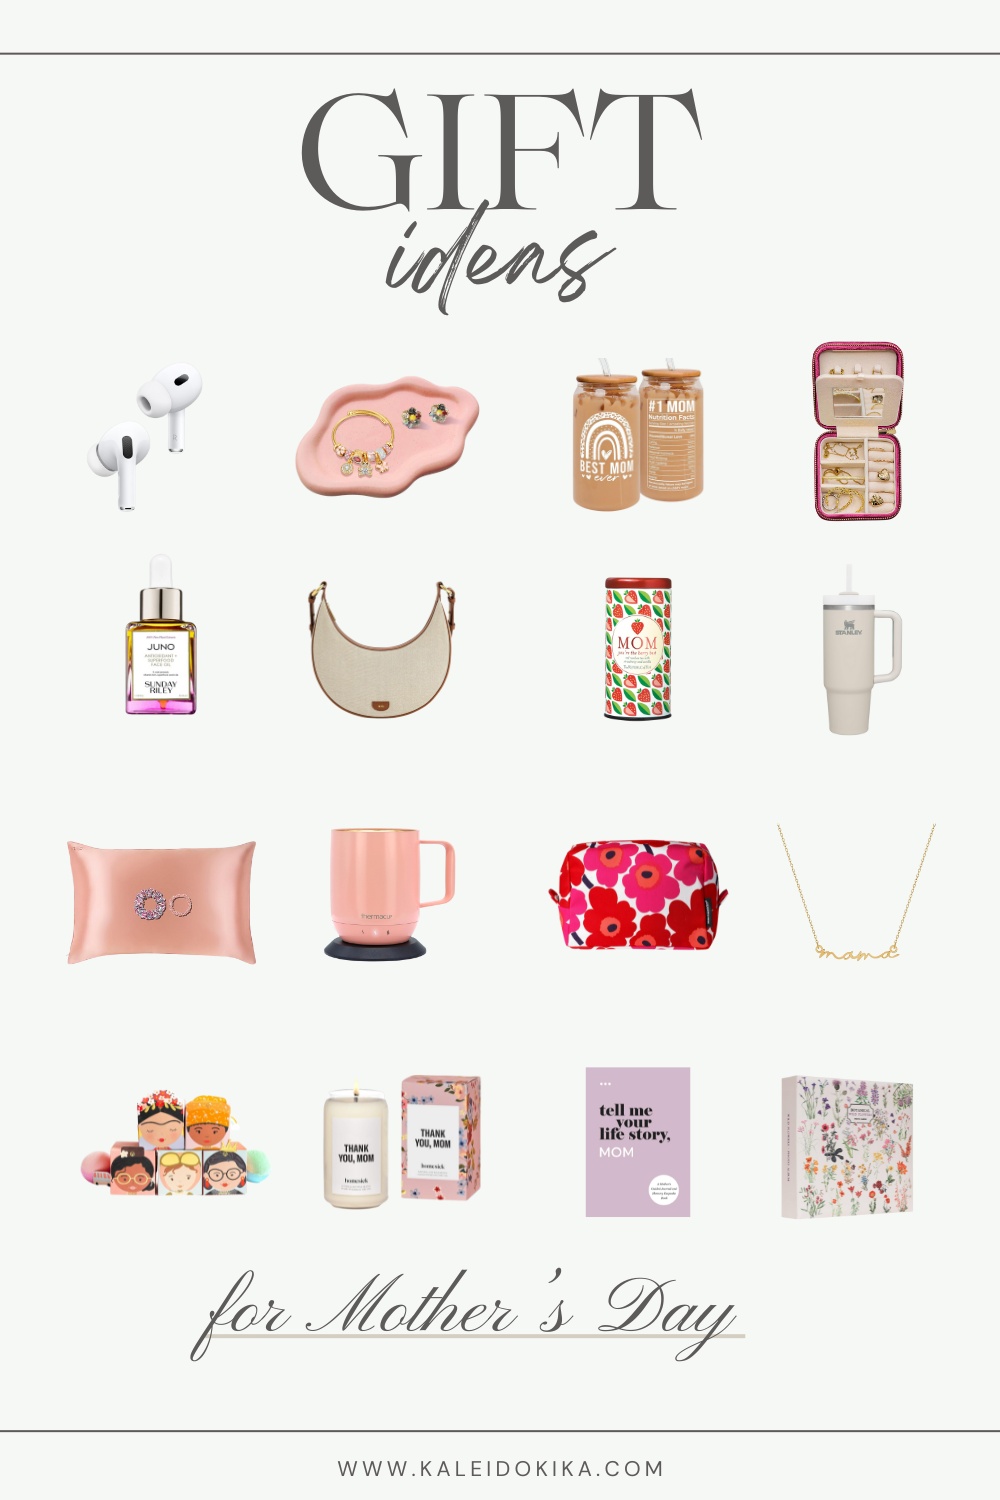 Image showing 18 gift ideas for Mother's Day on amazon